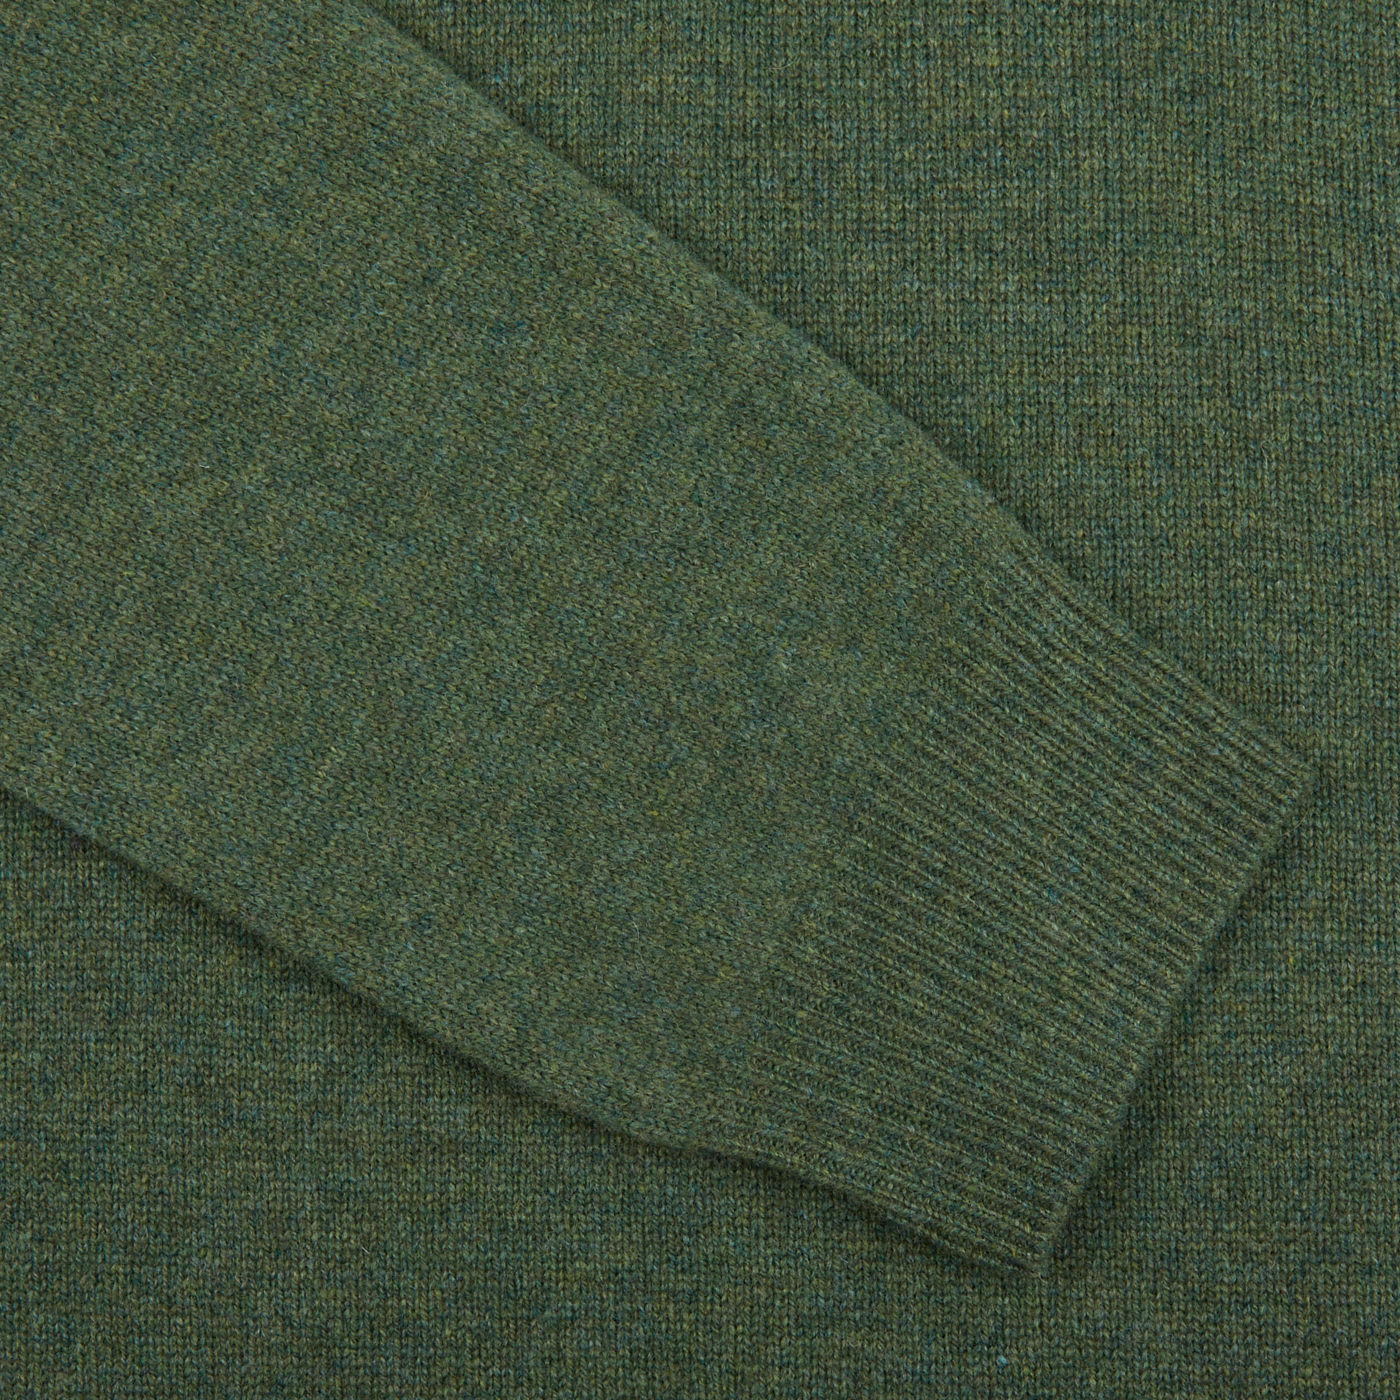 A contemporary close up of an Alan Paine Rosemary Green Lambswool V-Neck sweater.